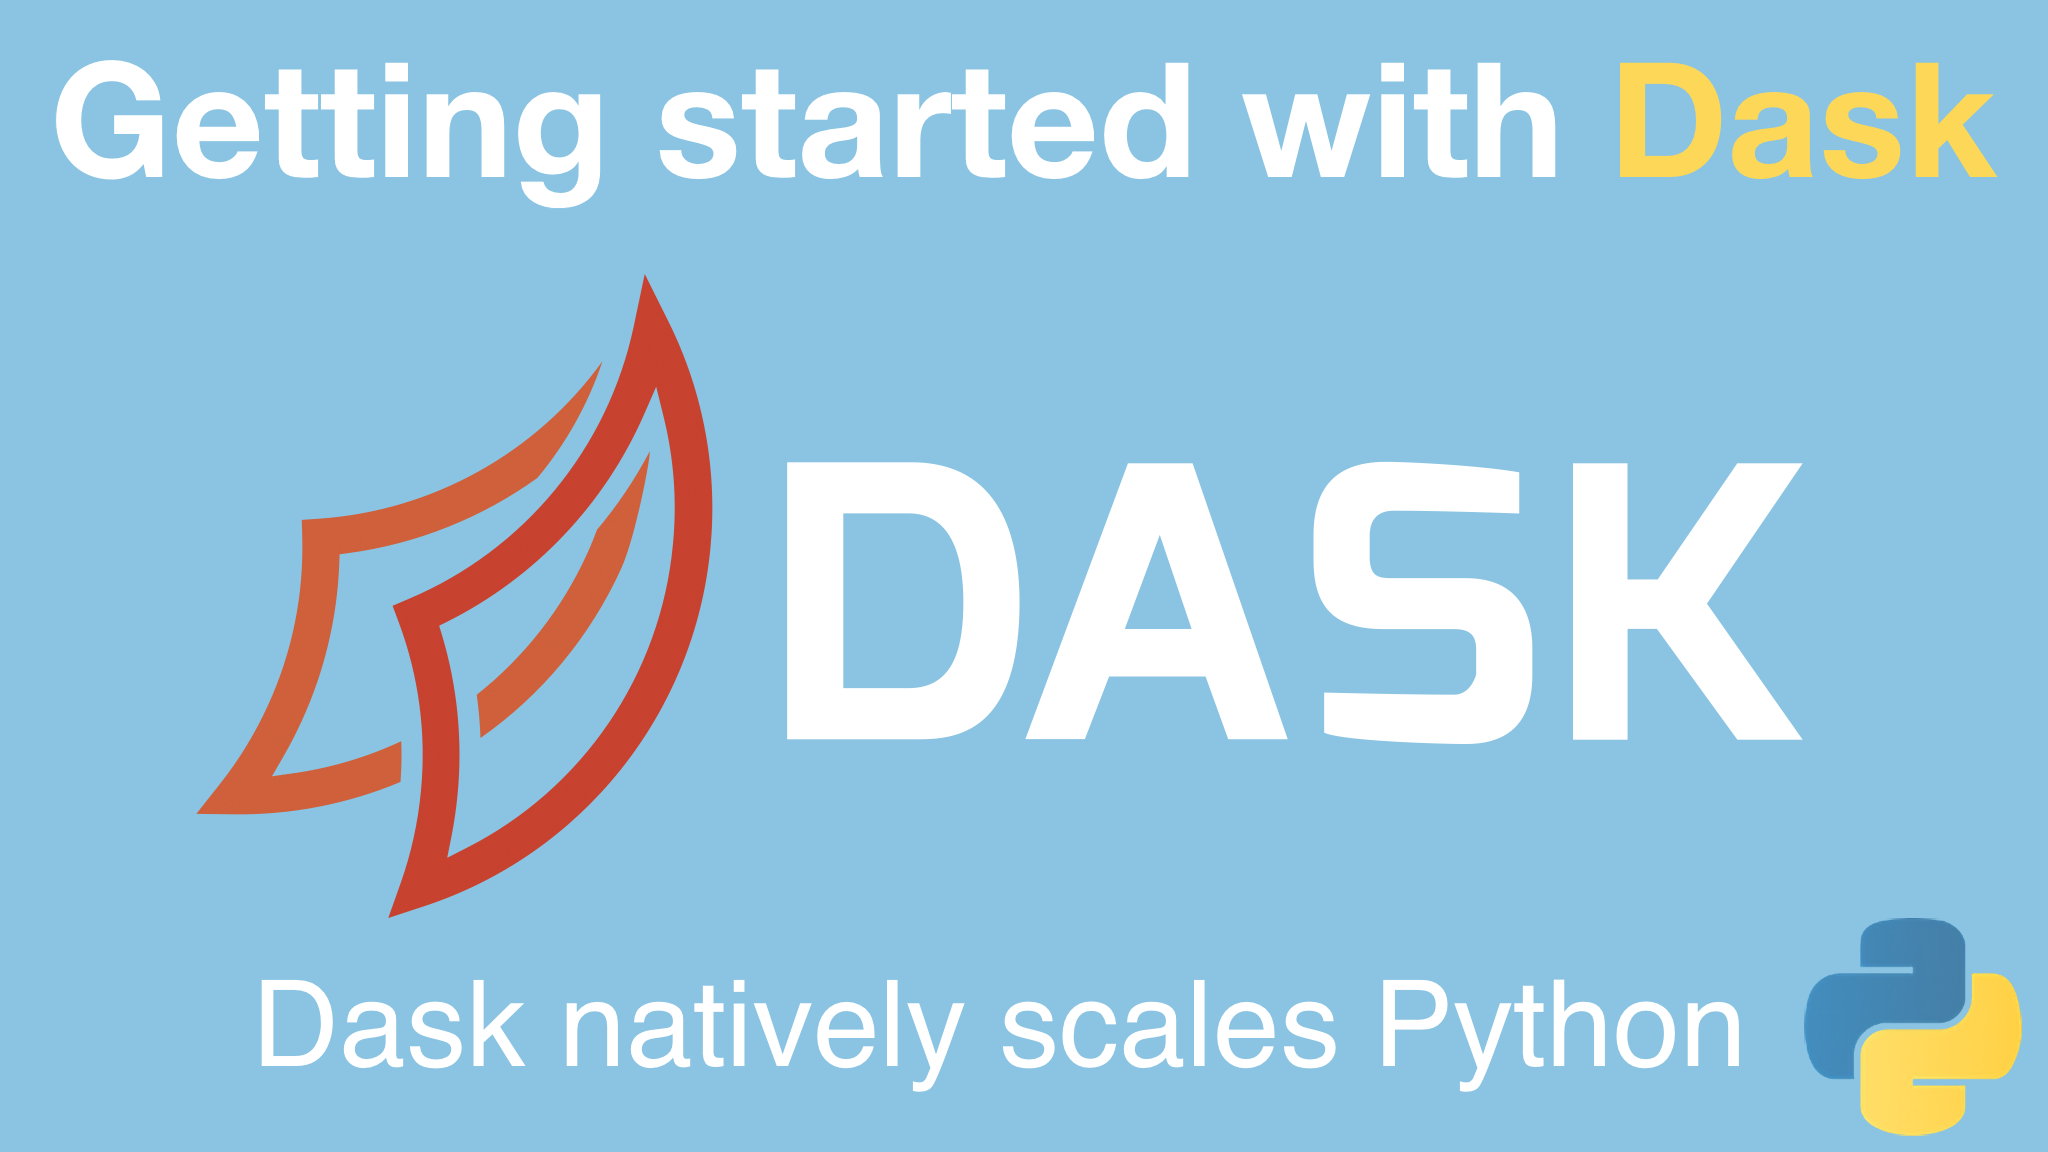 Course: Getting started with Dask